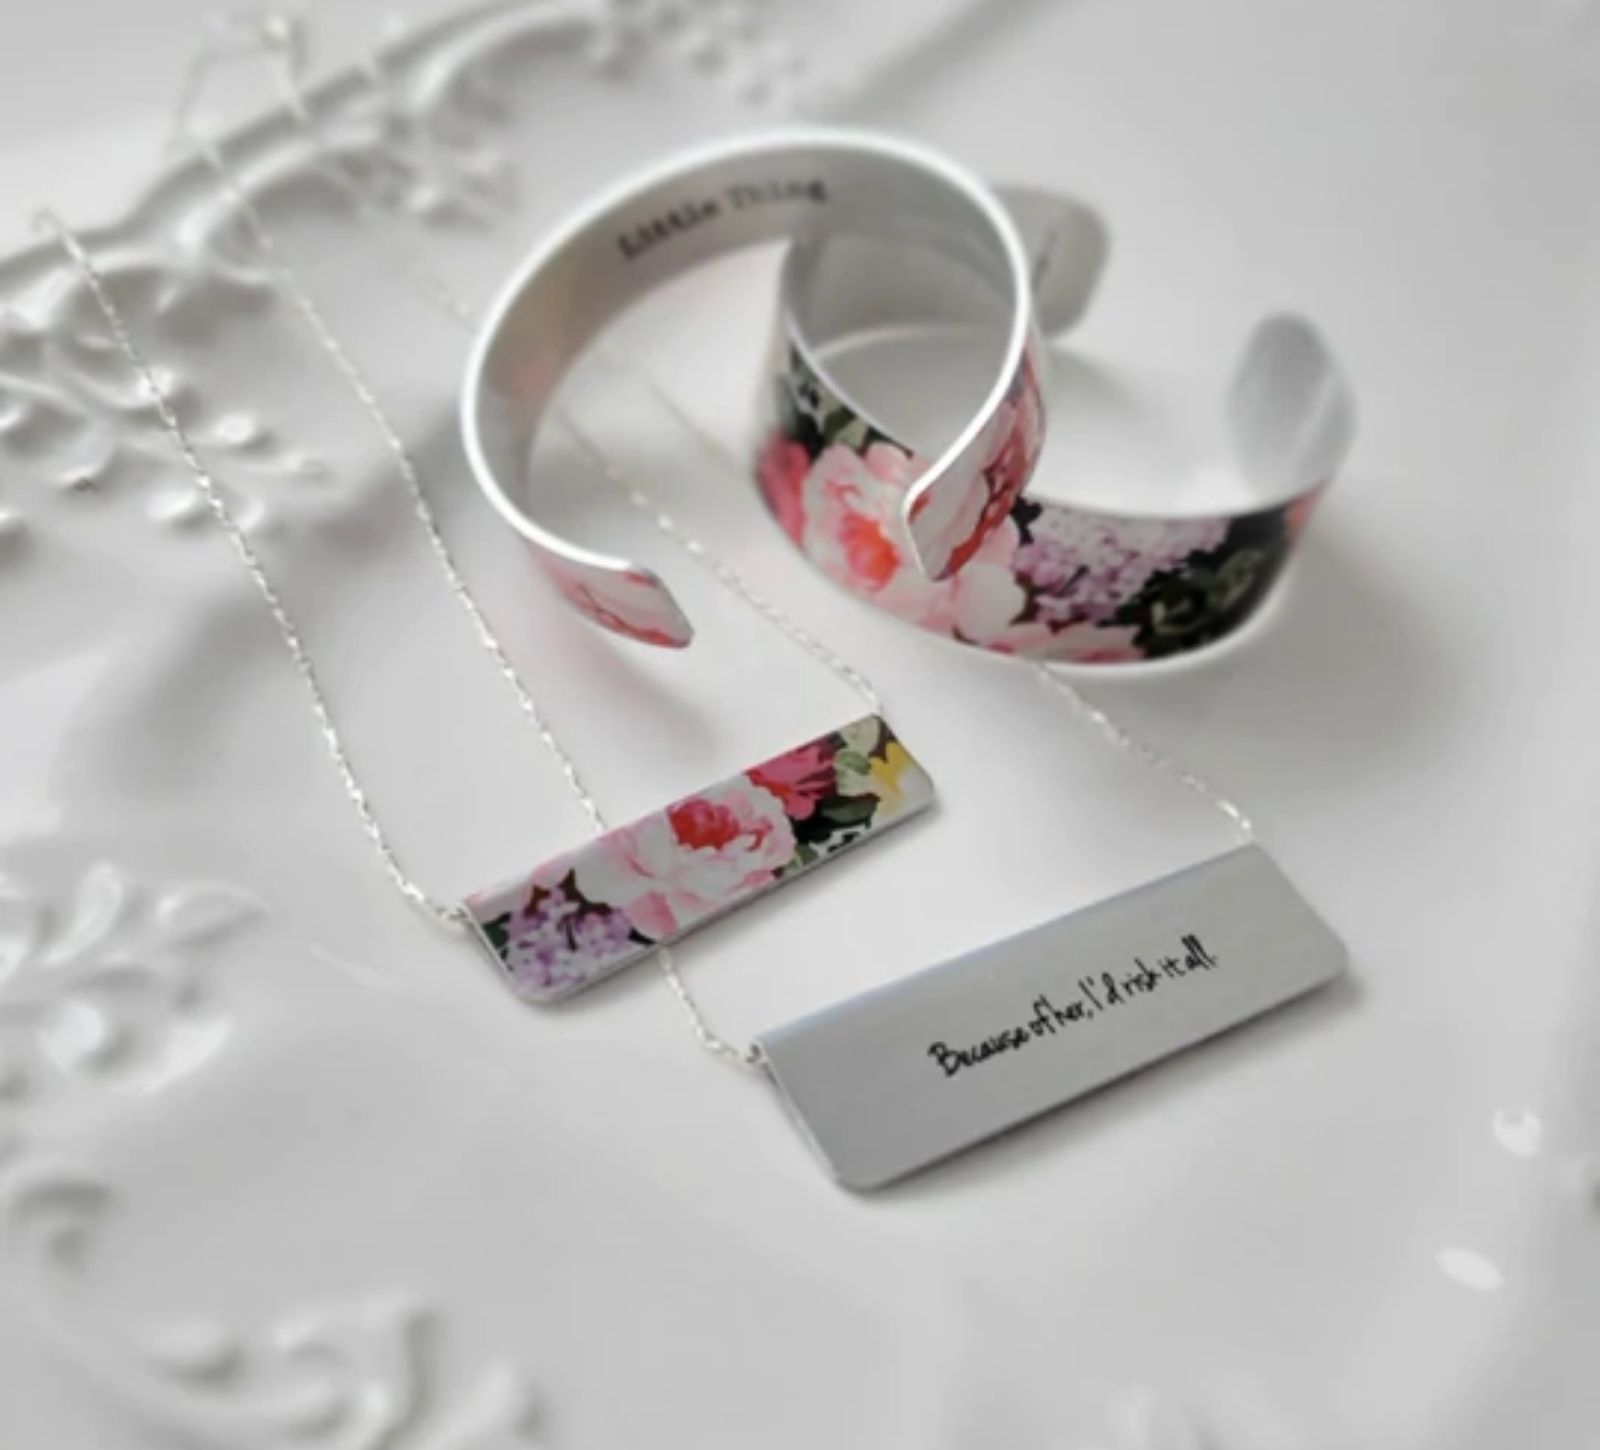 Gifts for Mom - Kitchen Table CEOs Blog - bracelets from Giftologie shop